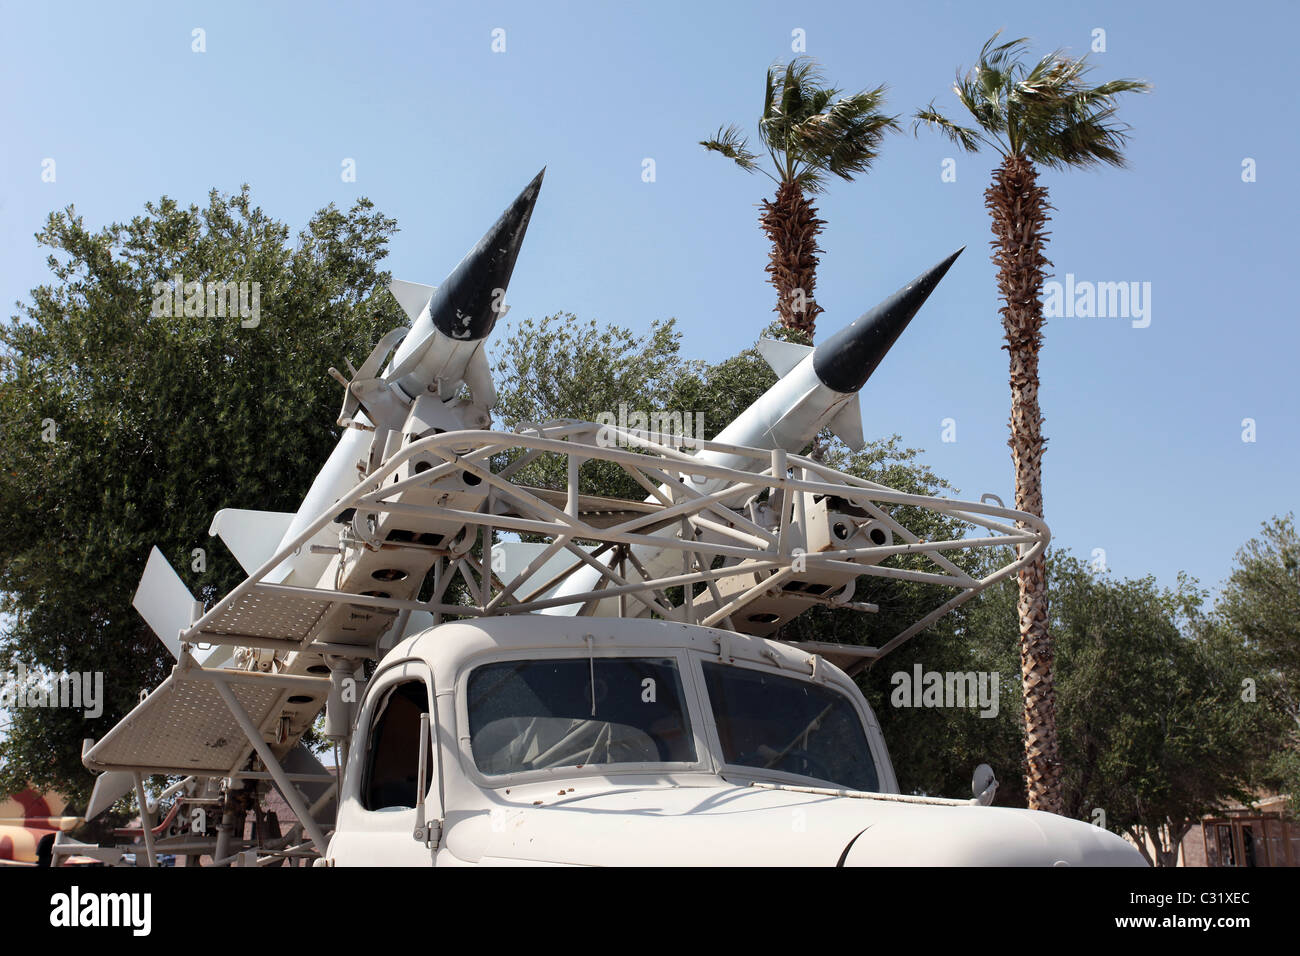 Soviet SA-3 Goa surface to air missile mounted on truck launcher. Weapons system used to shoot aircraft down. Stock Photo